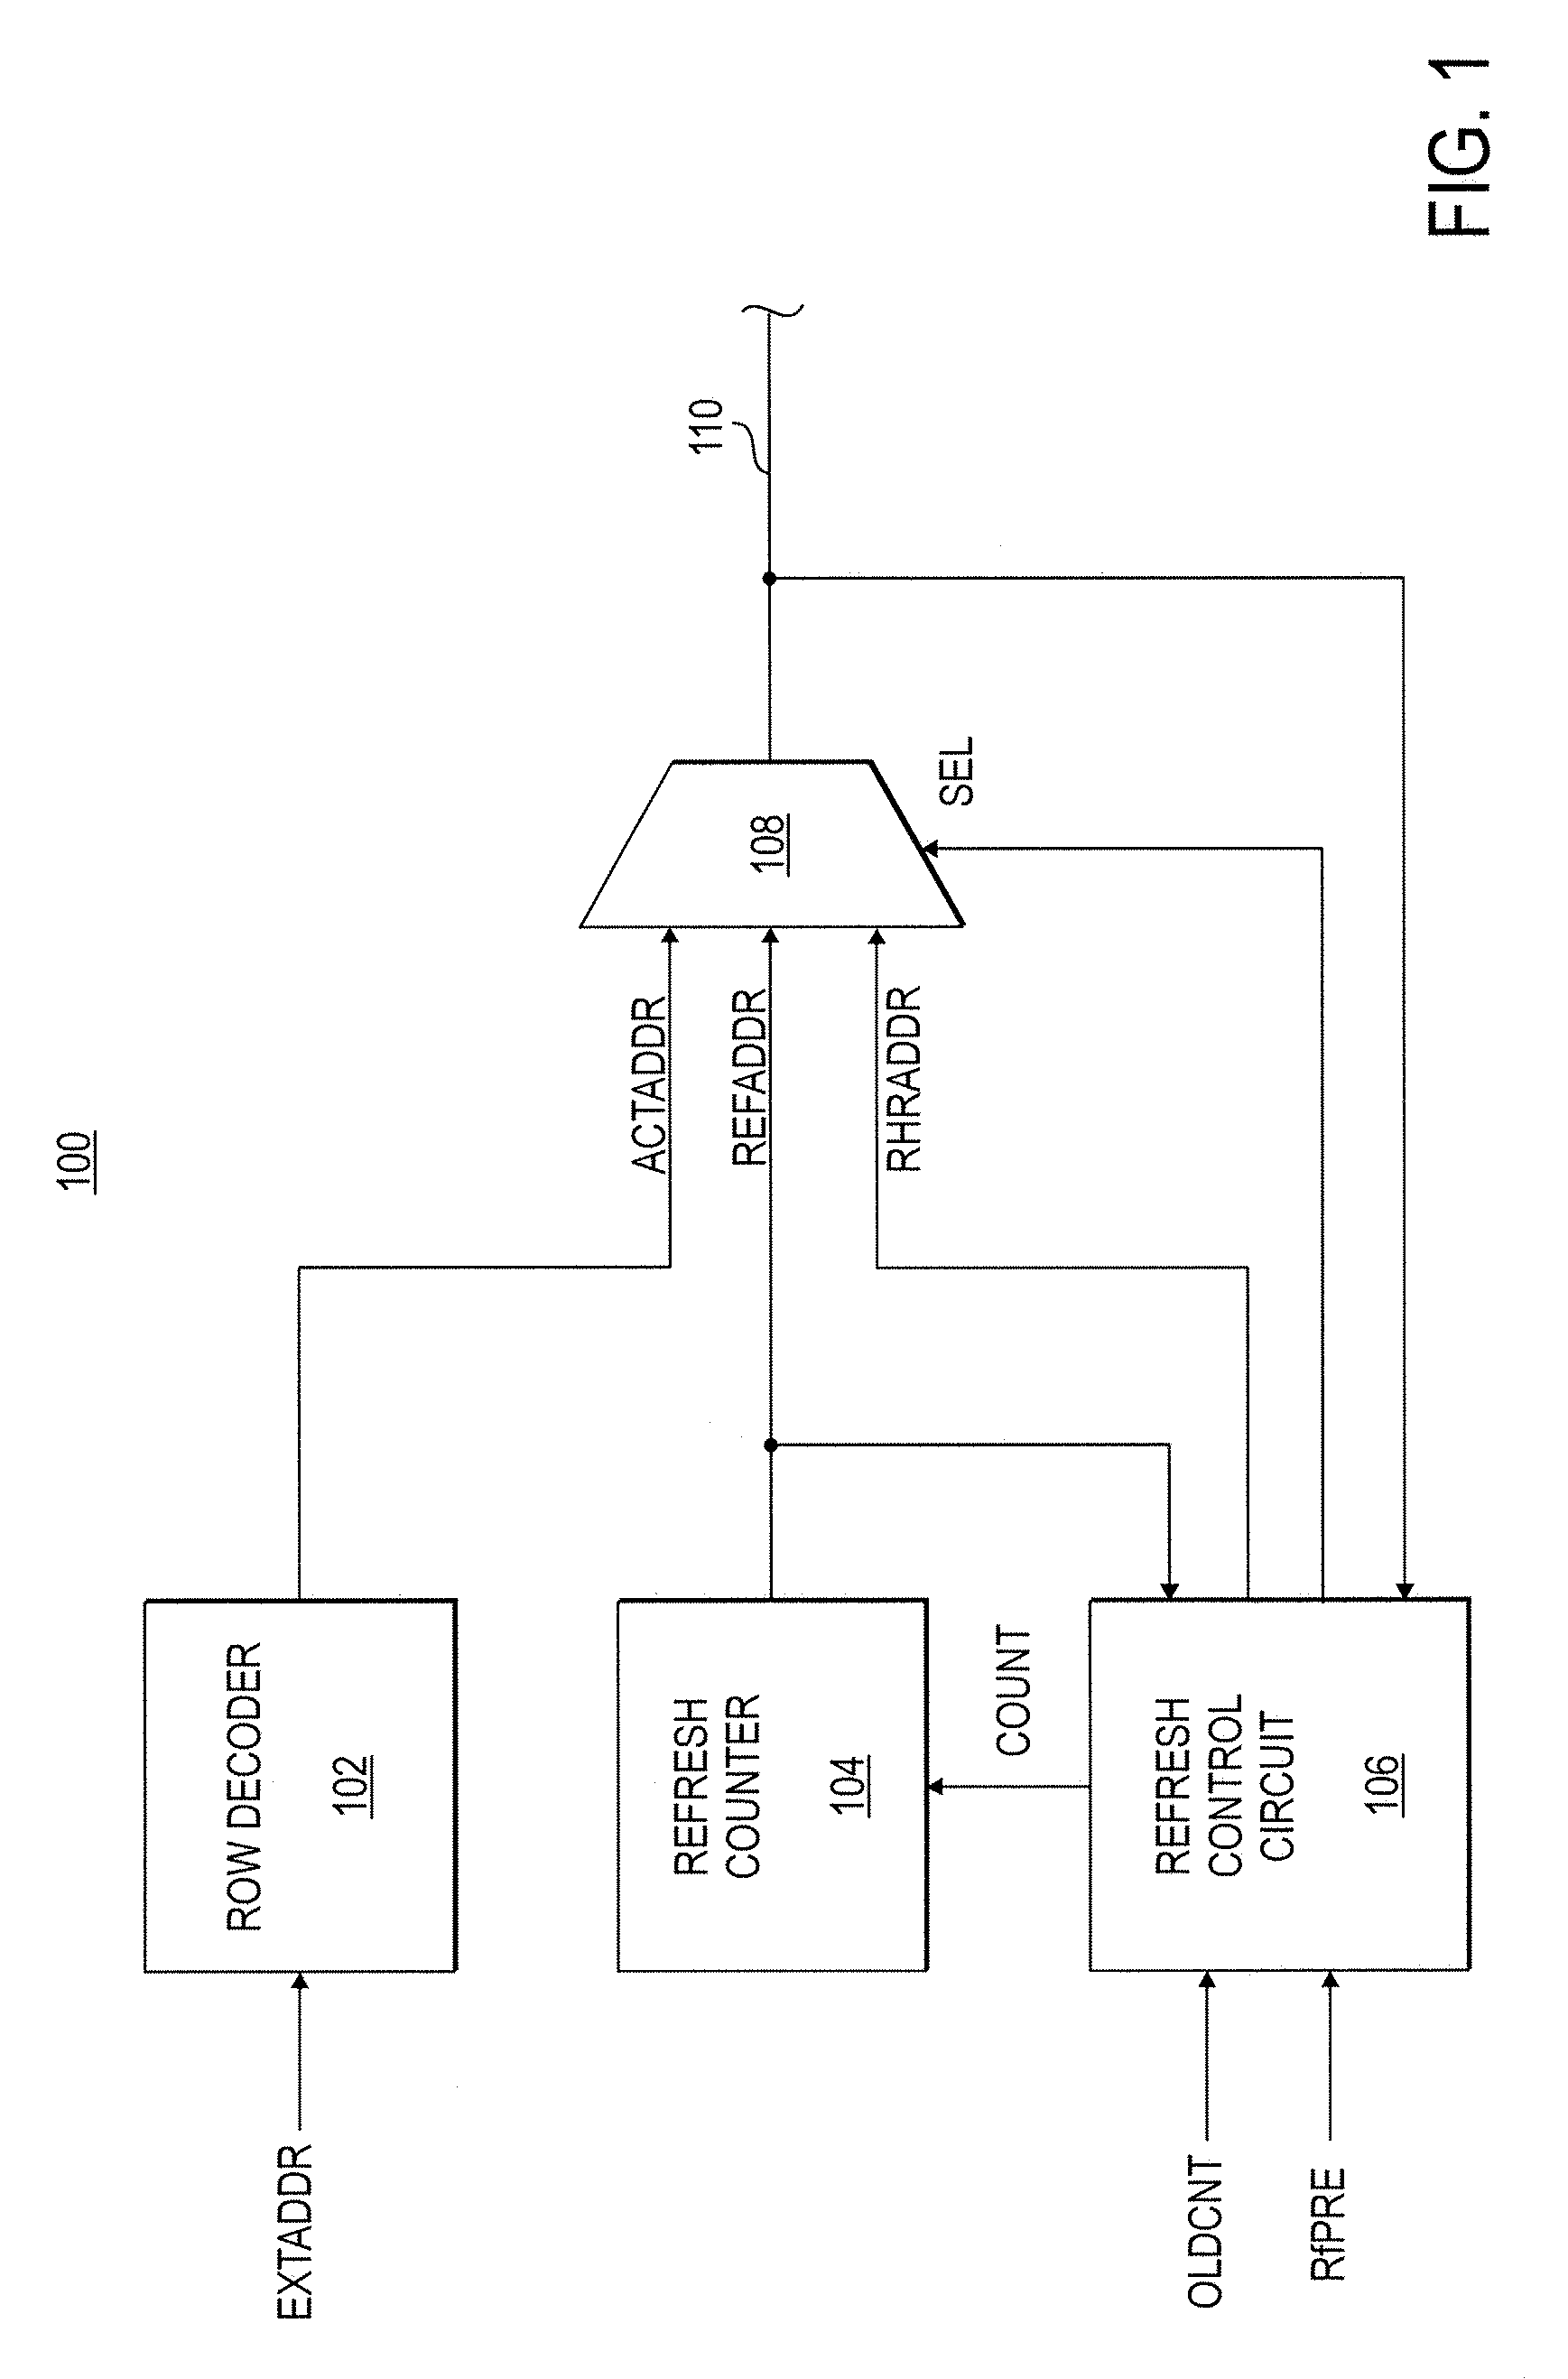 Apparatuses and methods for selective row refreshes